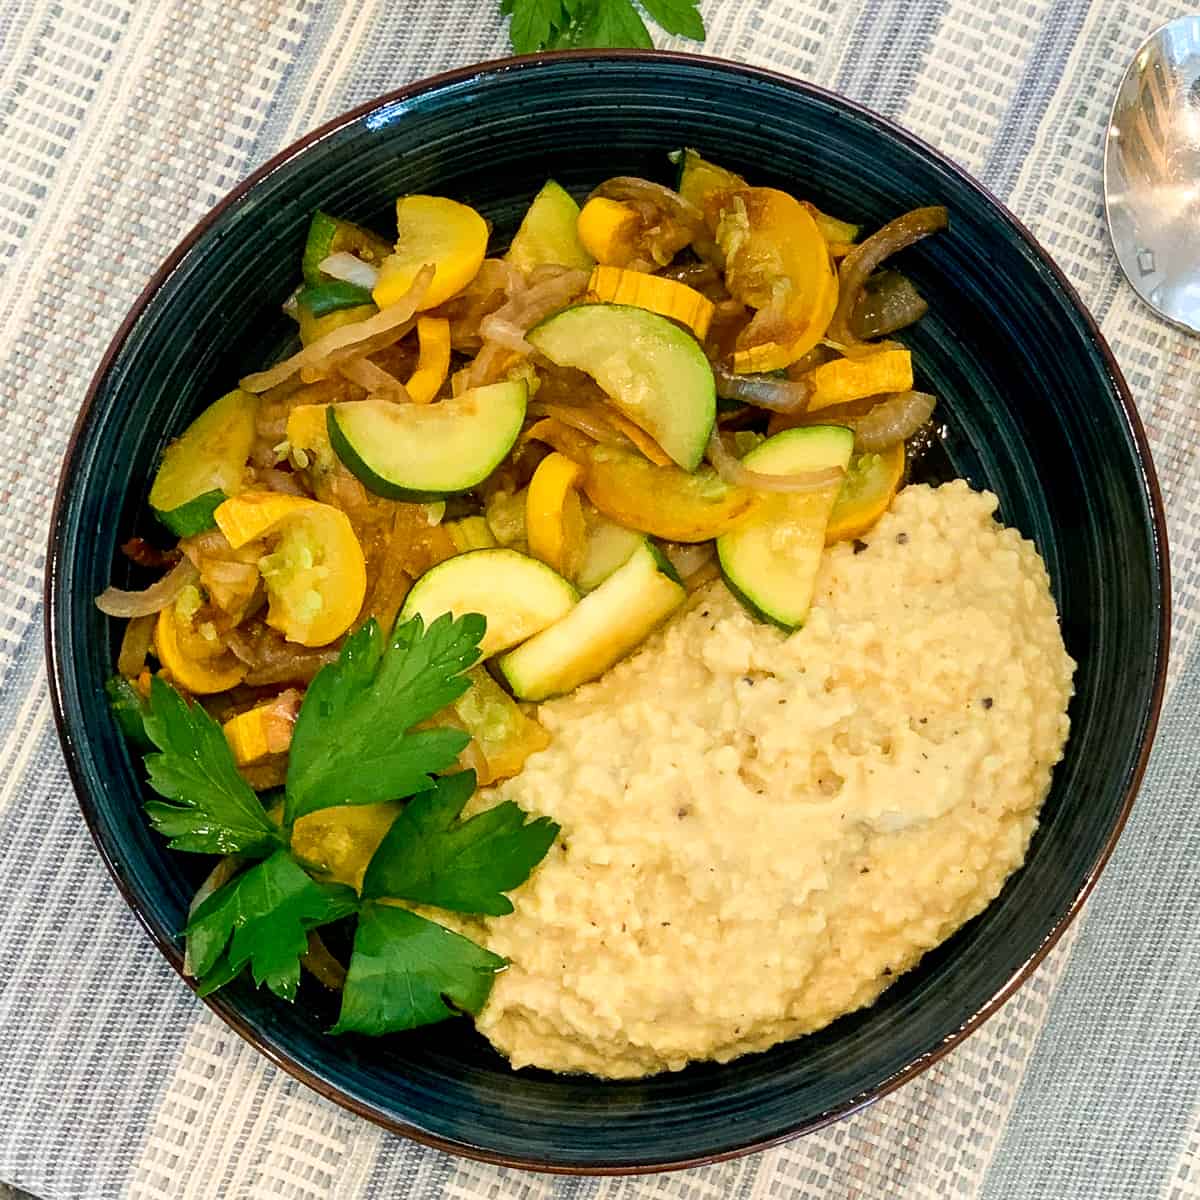 millet in a bowl with summer squash and fresh herbs